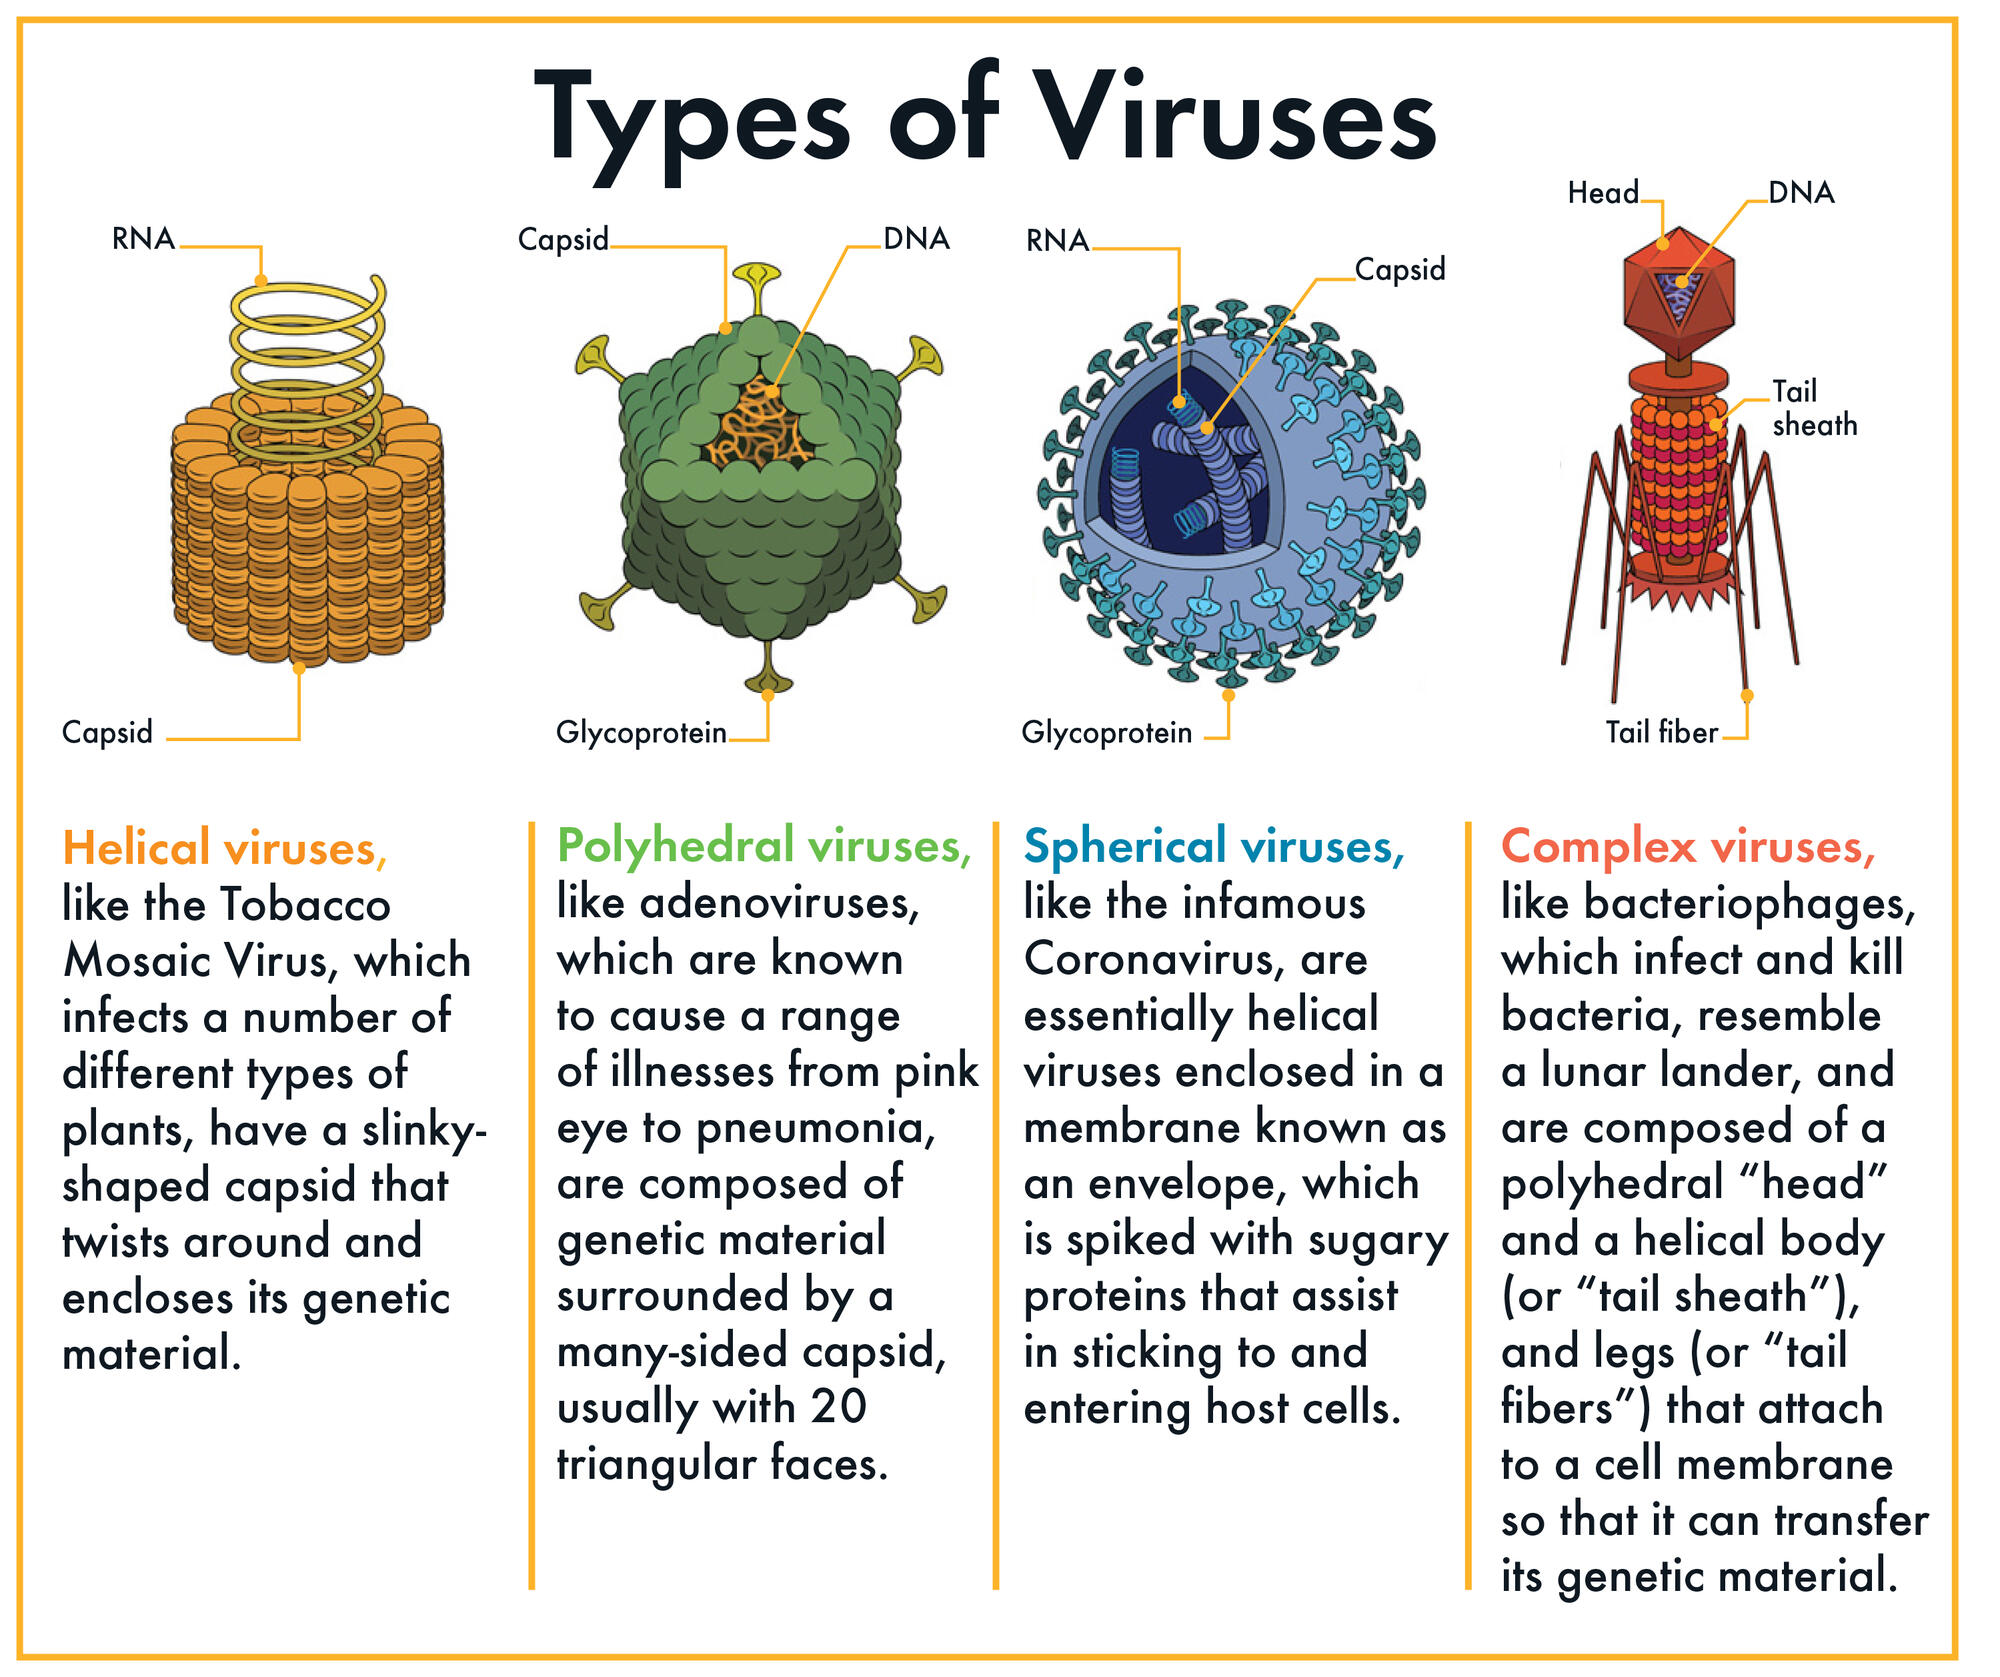 Color illustrations of 4 types of viruses with descriptions.